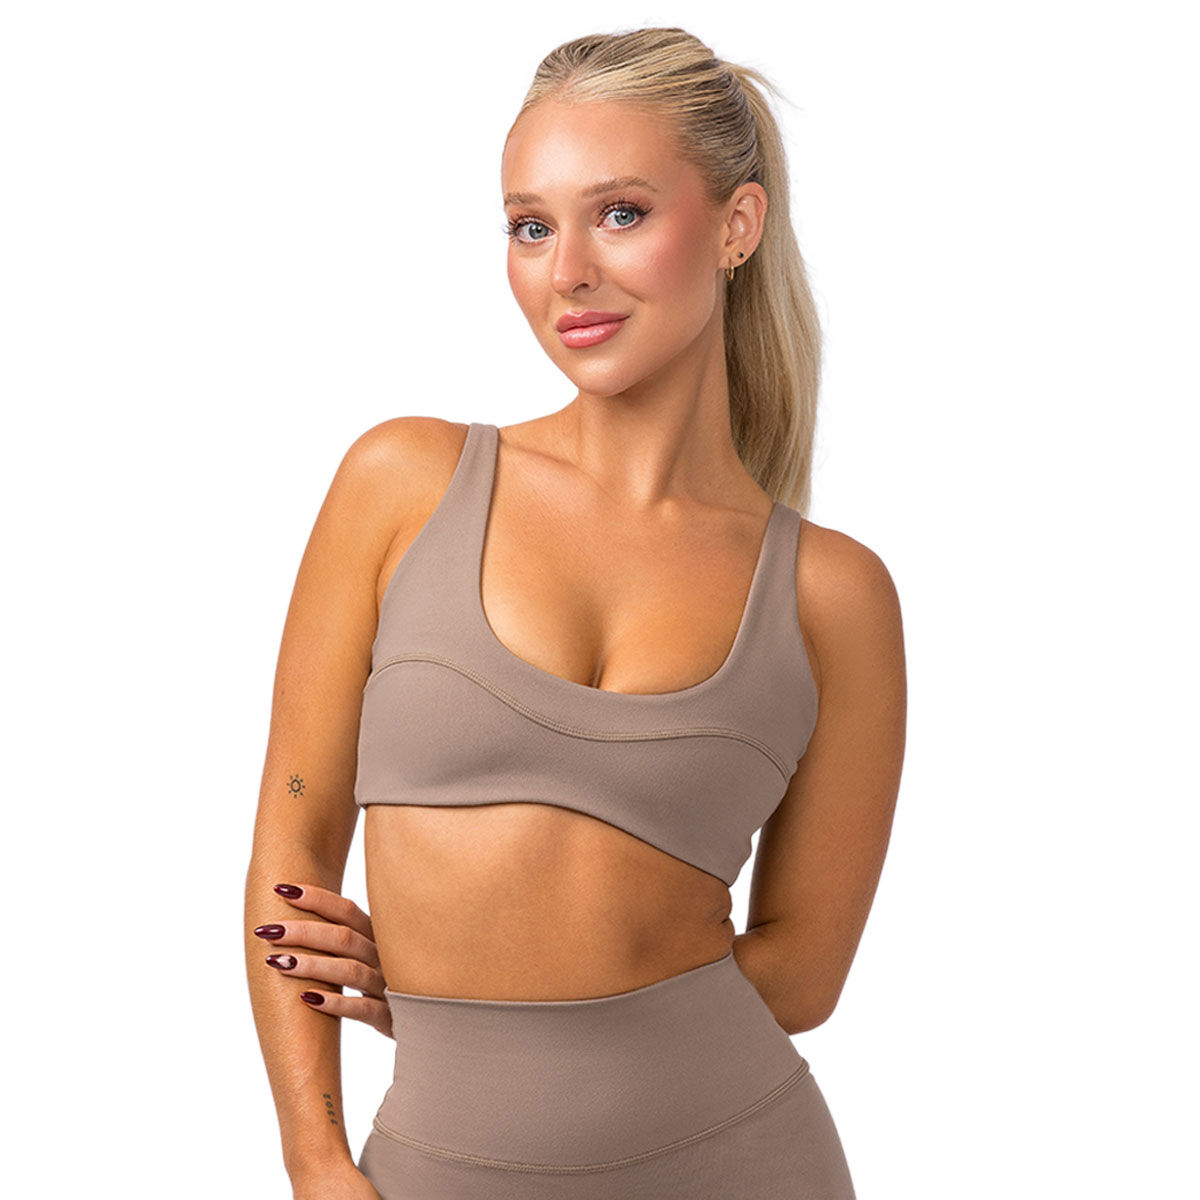 Women's Sports Bralettes - Muscle Nation